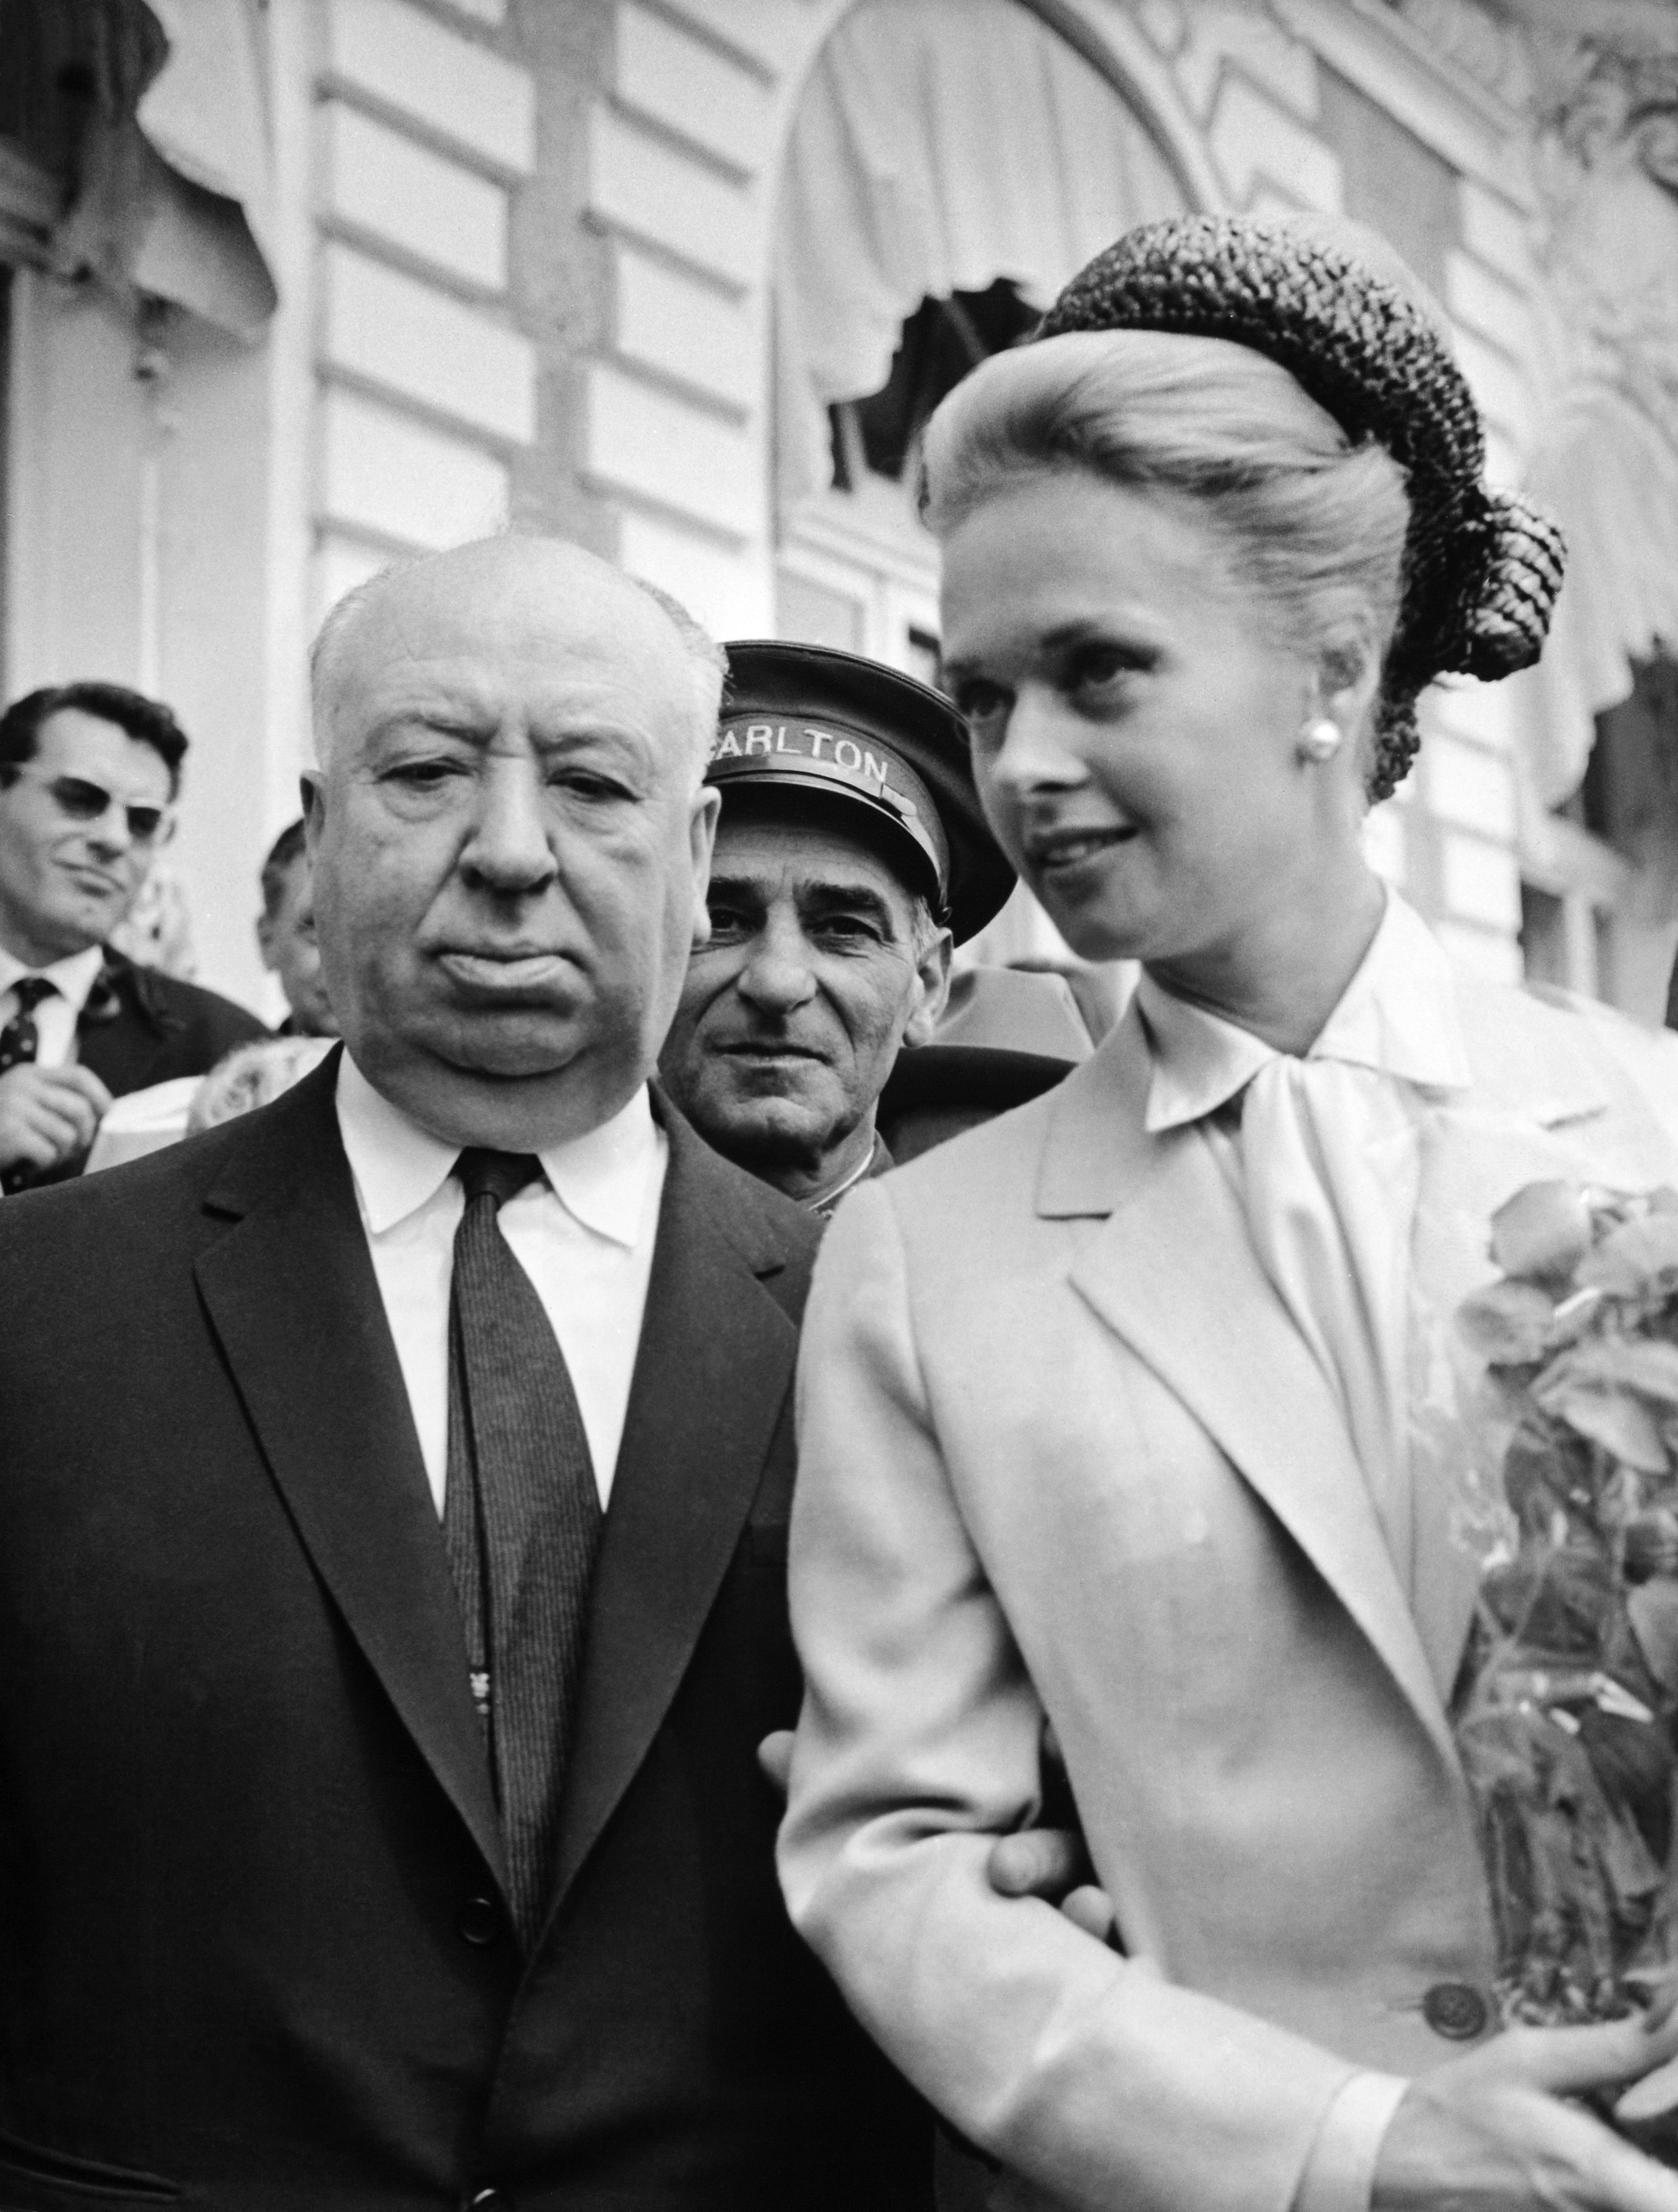 Alfred Hitchcock and Tippi Hedren in front of The Carlton Hotel in May 1963. | Source: Getty Images